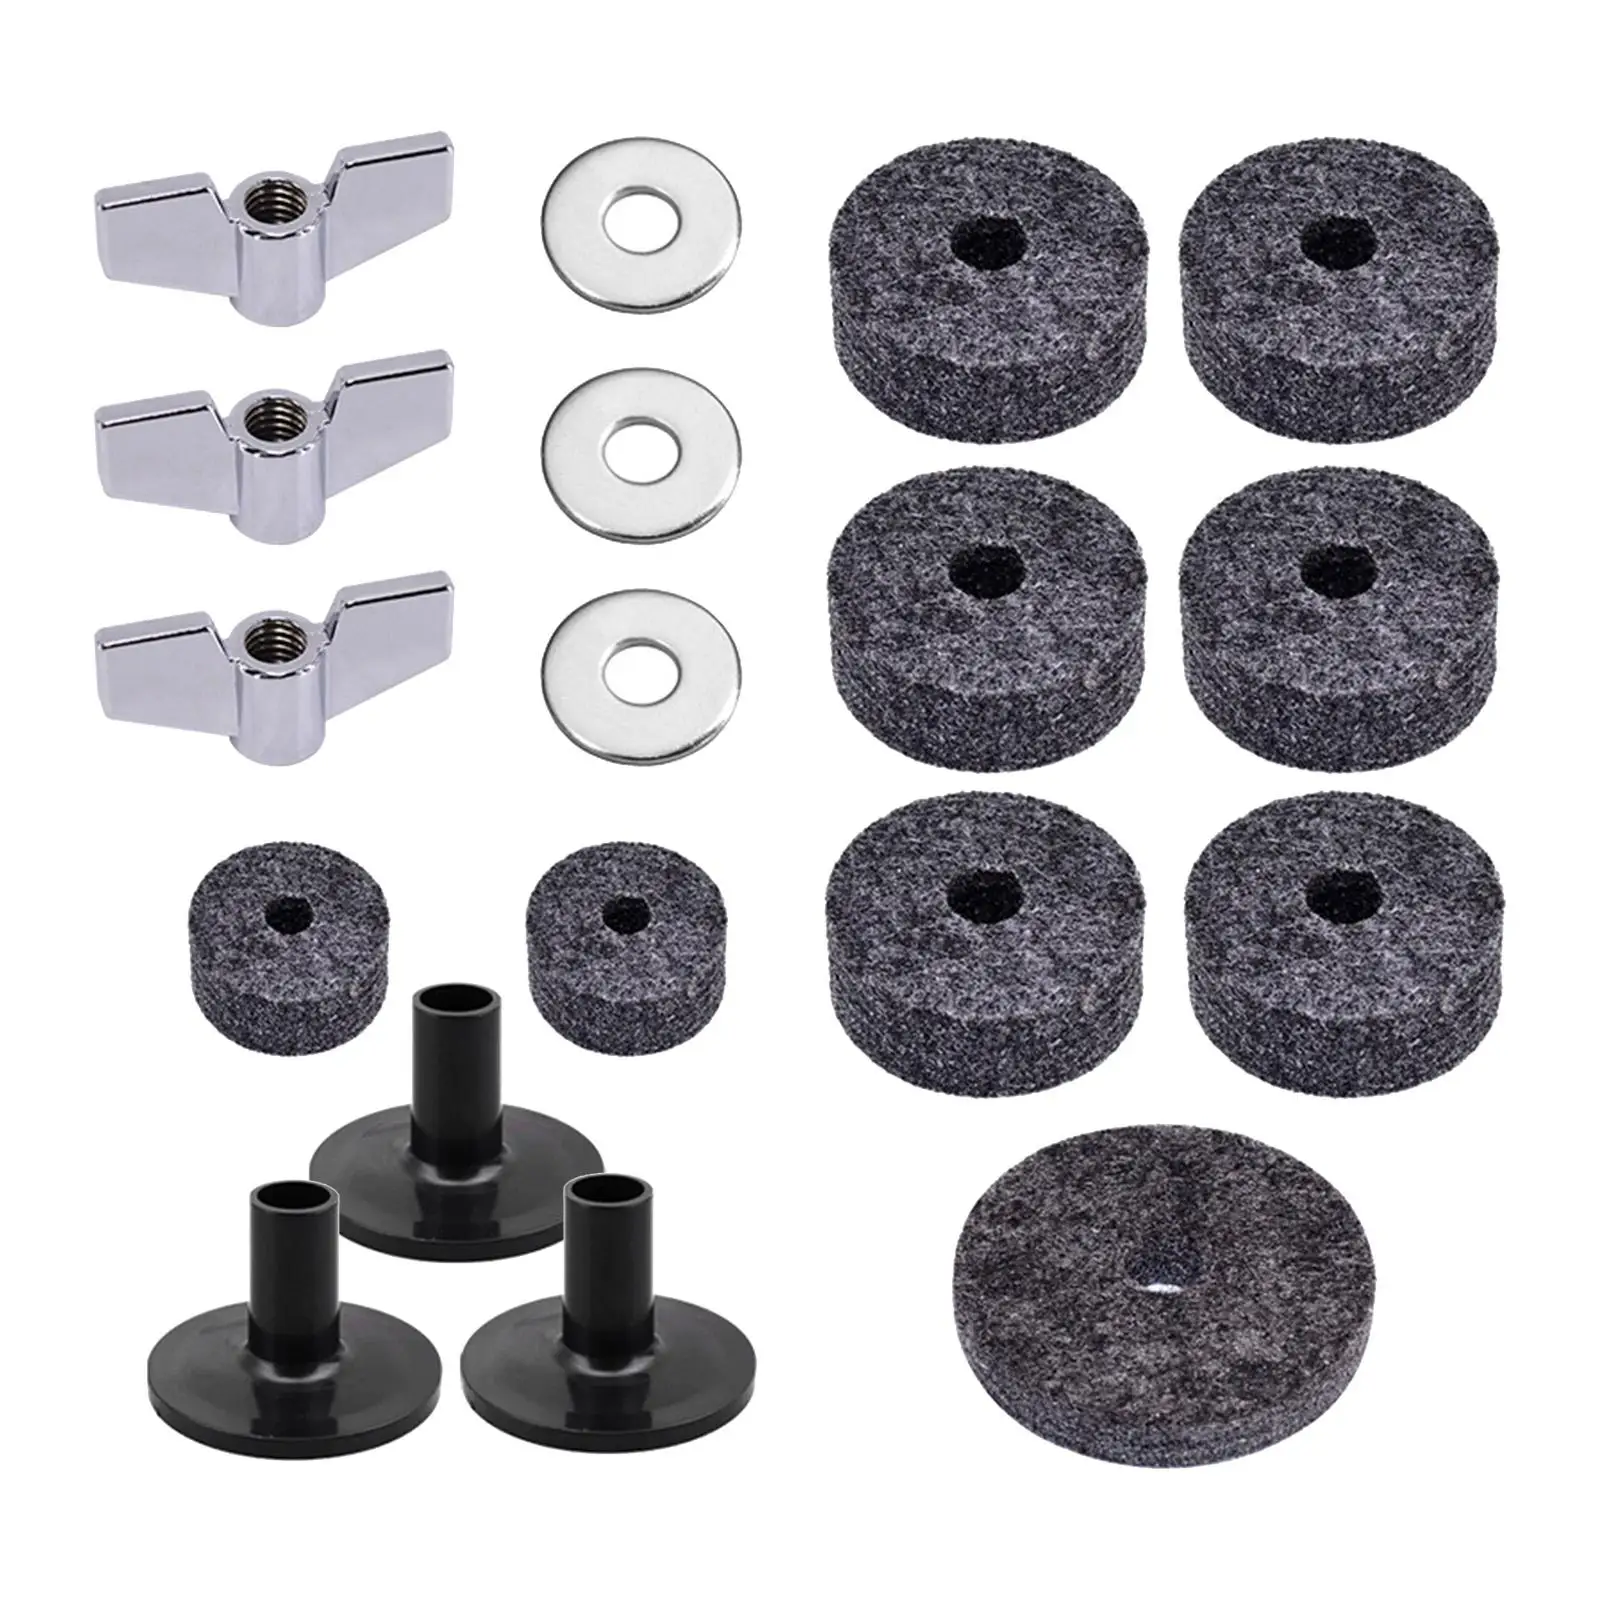 Equipment Cymbal Felts Washers Percussion Instruments, Cymbal Washer, Drum Replacement Parts Accs, for Performer Musician